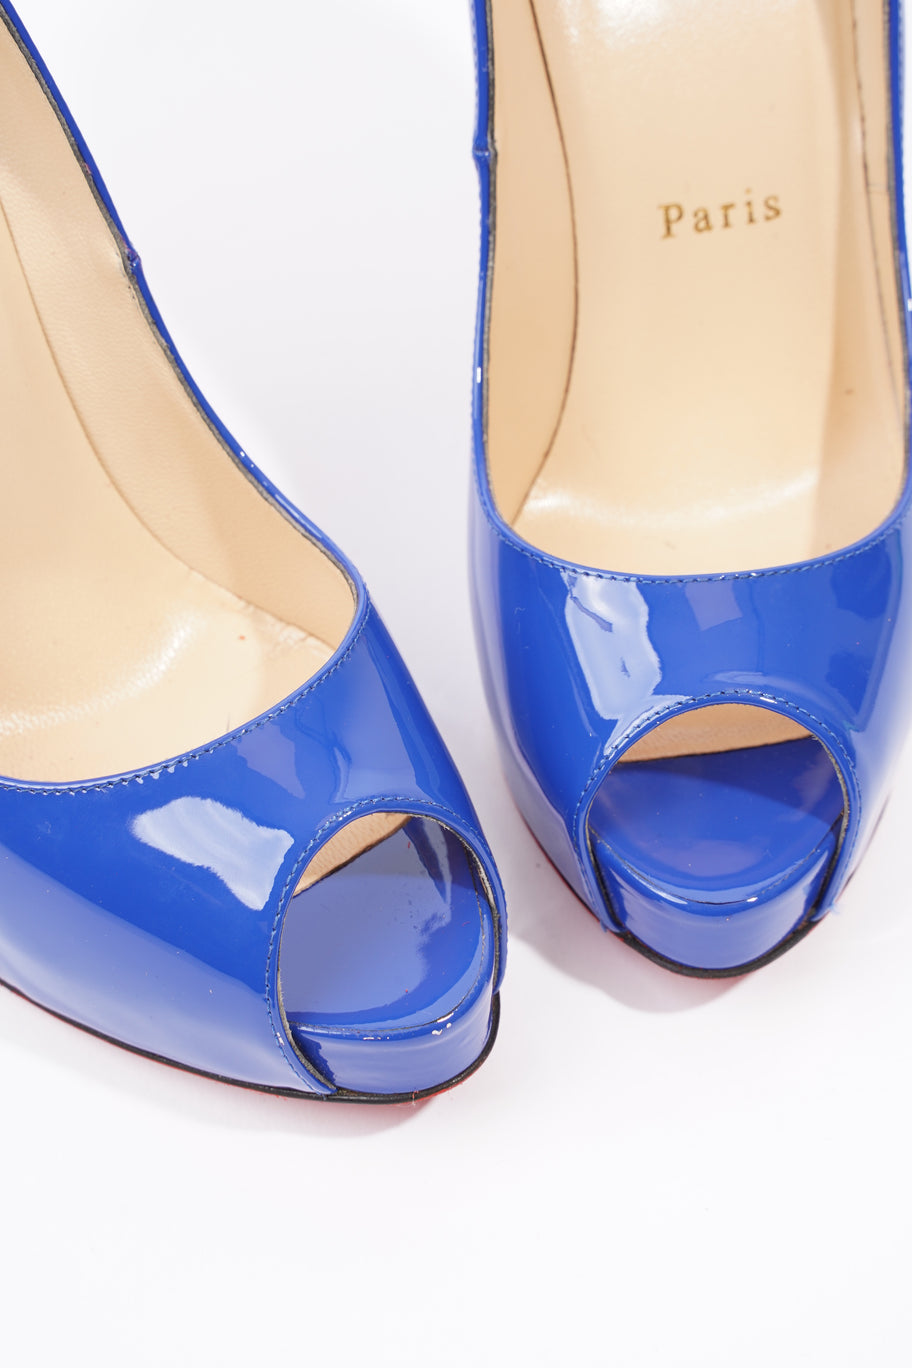 New Very Prive Heels 120 Blue Patent Leather EU 37.5 UK 4.5 Image 11